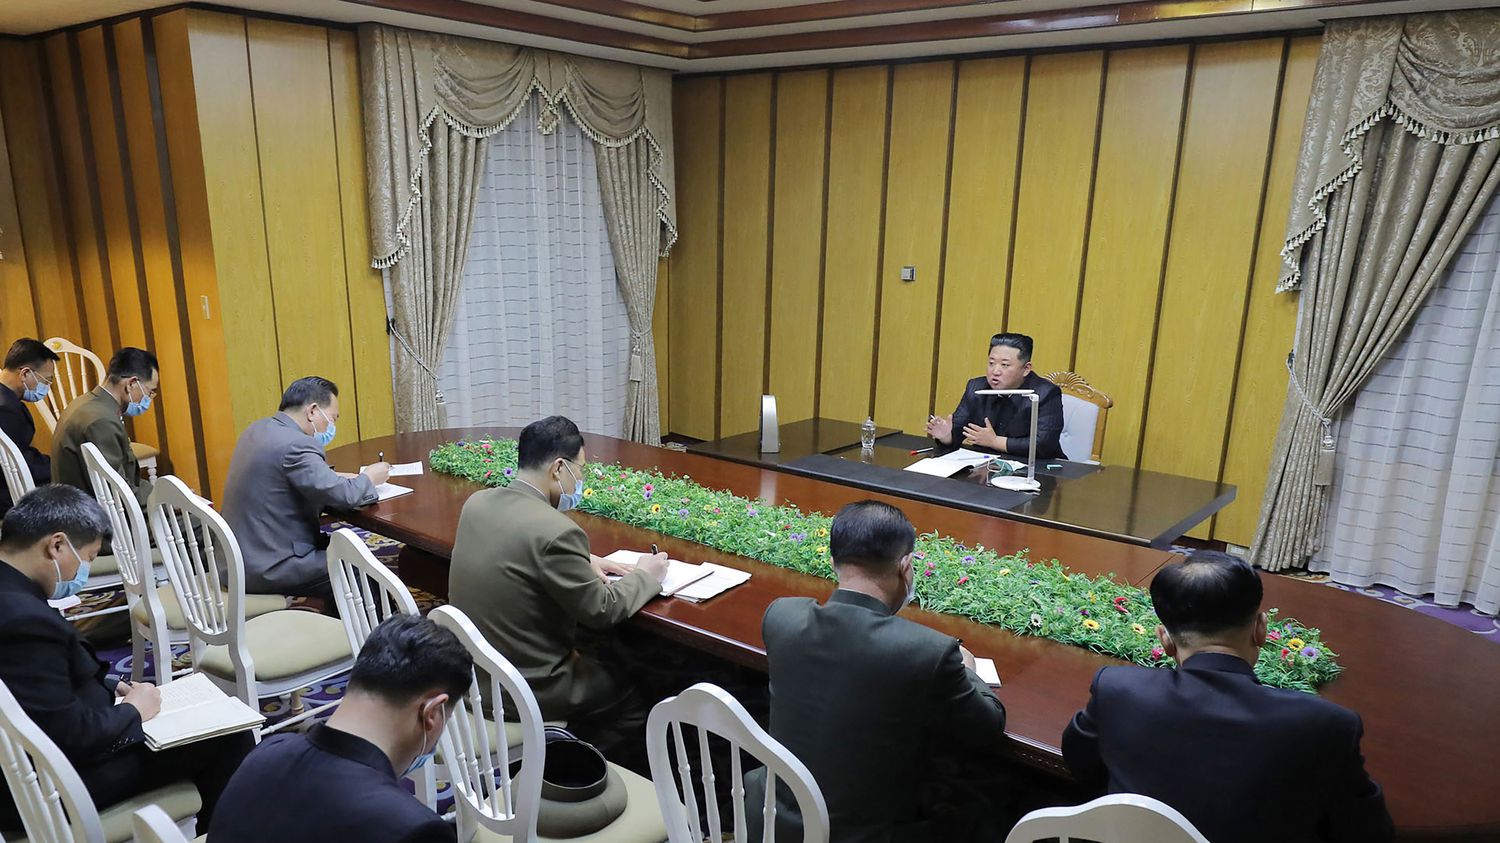 Covid-19: what we know about the health situation in North Korea, which has just declared its first deaths linked to the disease
